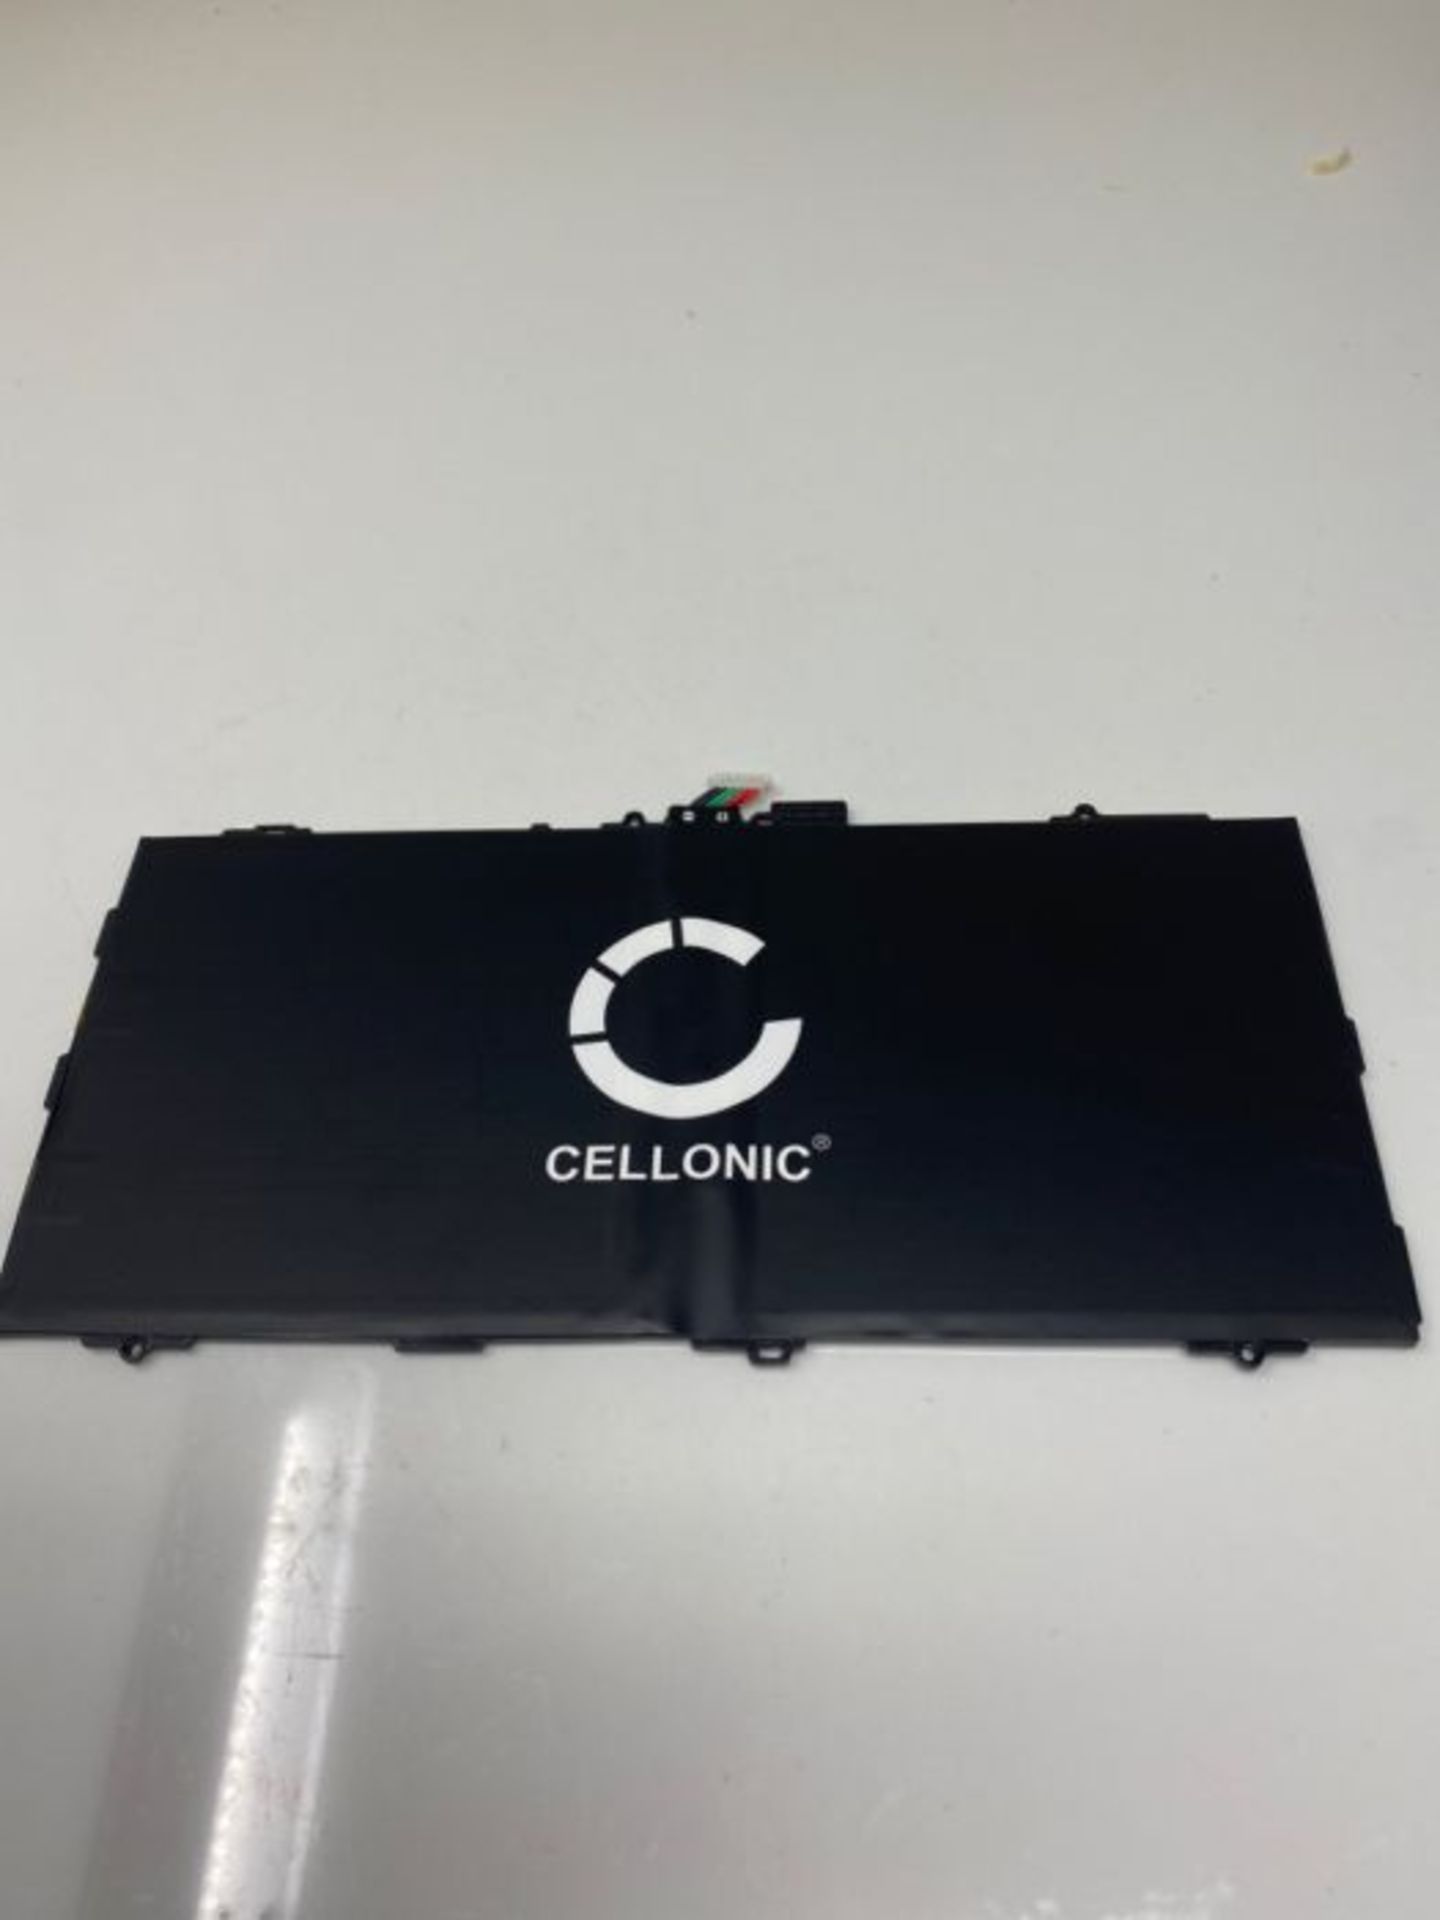 CELLONIC® Replacement Tablet Battery for Samsung Galaxy Tab S 10.5 (SM-T800 / SM-T805 - Image 6 of 6